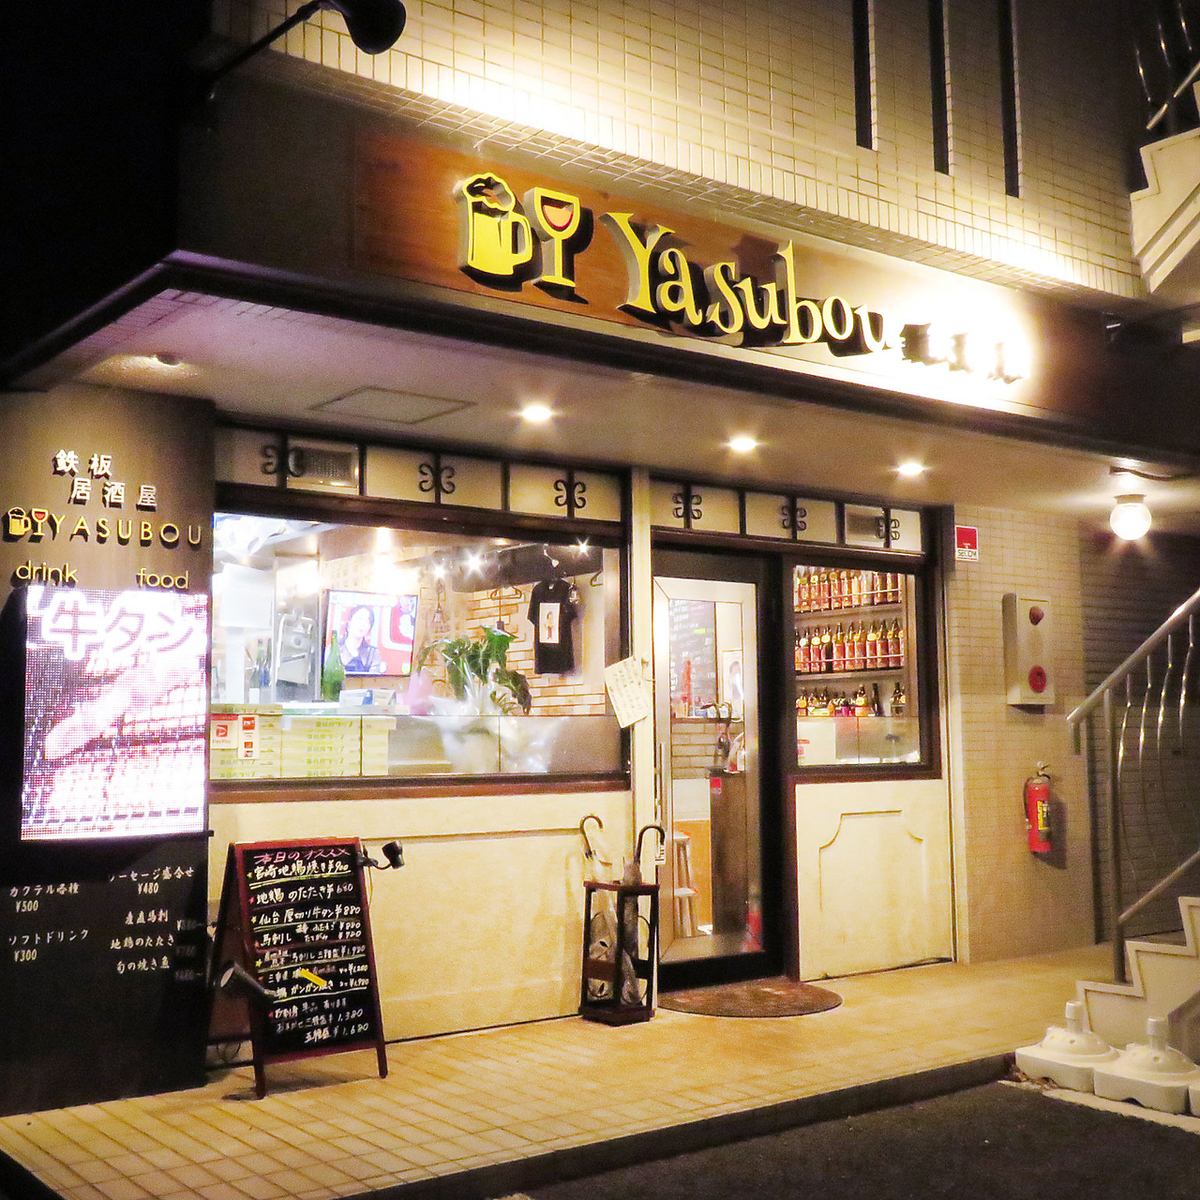 15 minutes on foot from the station! Visit Yasubou, a teppanyaki izakaya where you can enjoy authentic teppanyaki at an affordable price